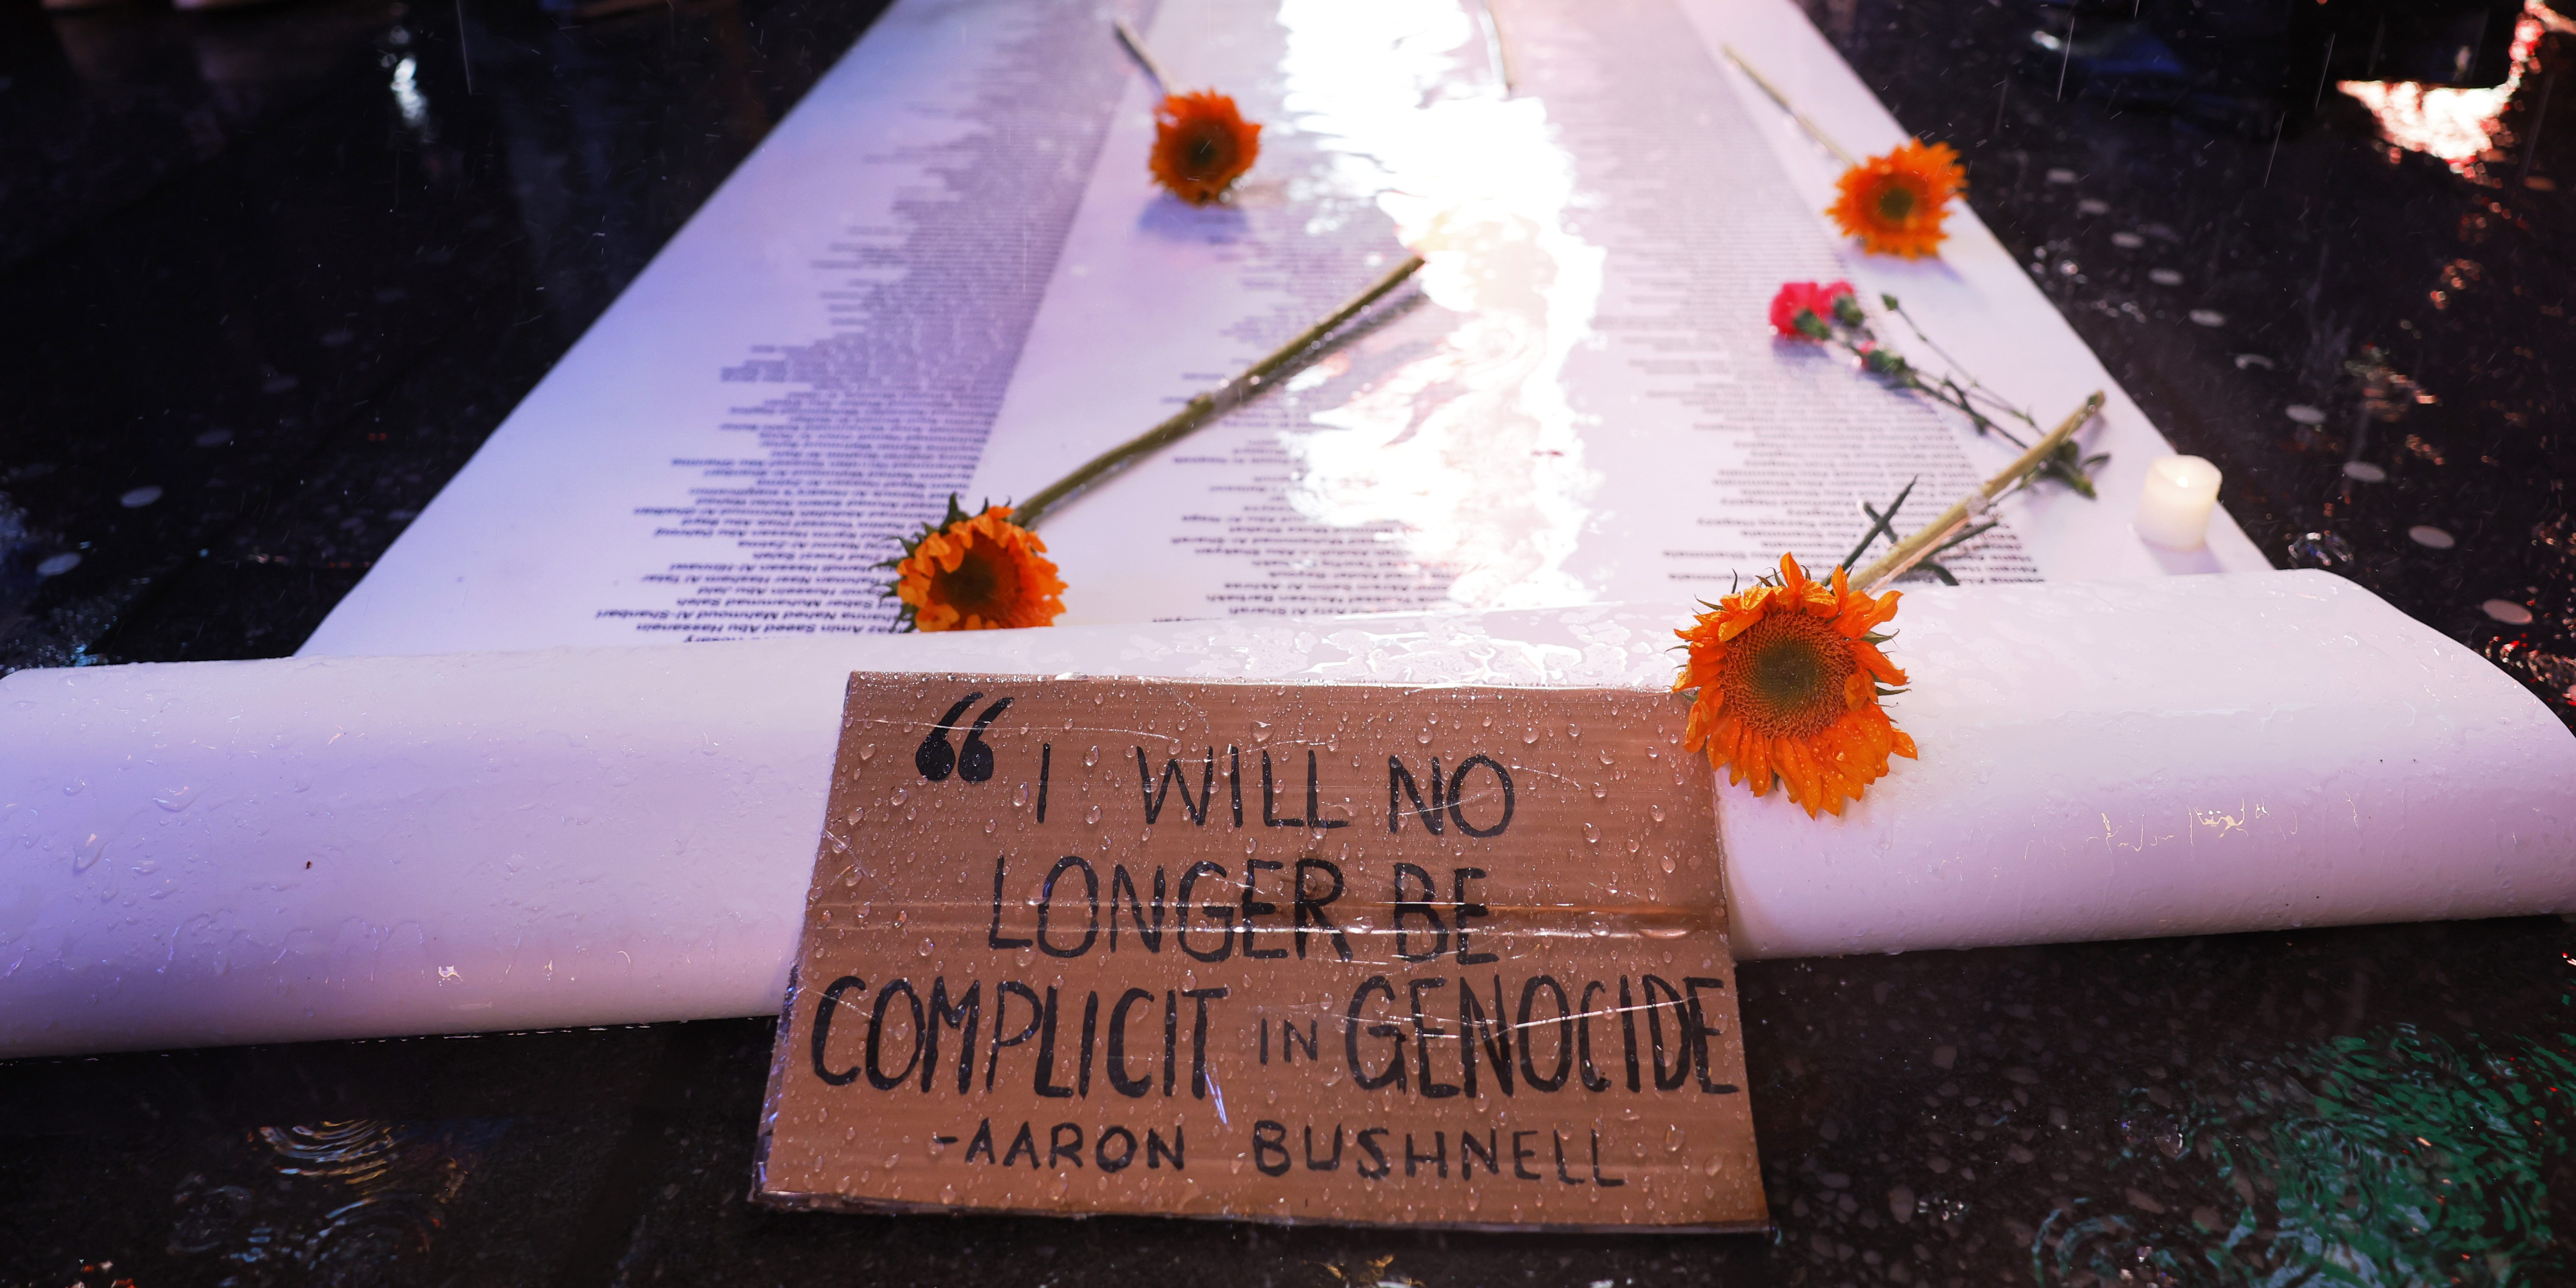 NEW YORK, NEW YORK - FEBRUARY 27: A sign with words one of the last words said by U.S. Airman Aaron Bushnell is seen during a vigil at the US Army Recruiting Office in Times on February 27, 2024 in New York City. Bushnell died after setting himself on fire outside the Israeli Embassy in Washington, DC on Sunday. In a video that was posted to a social media account showing the act, he stated that would “no longer be complicit in genocide," before pouring an unknown liquid over himself and igniting it while yelling “Free Palestine” repeatedly. (Photo by Michael M. Santiago/Getty Images)